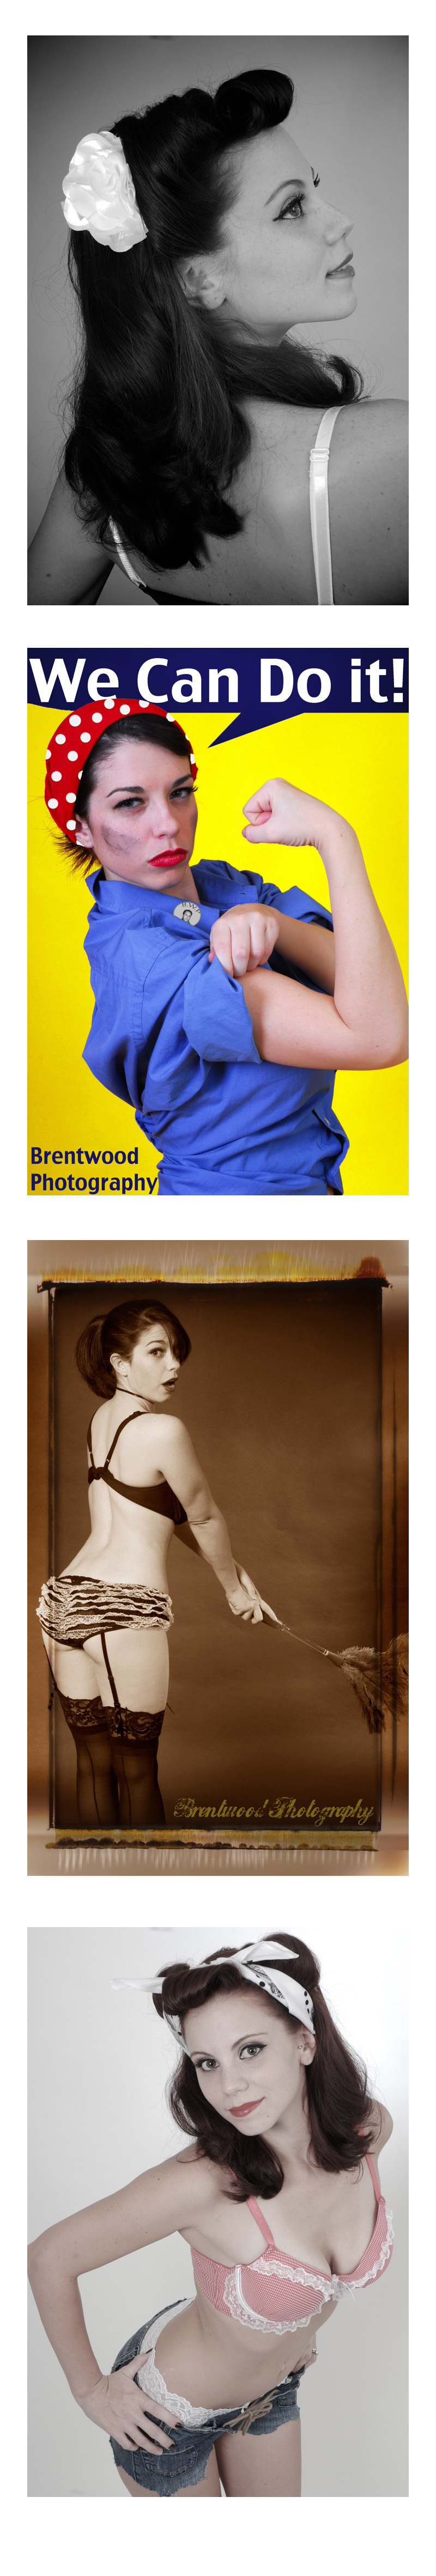 Male model photo shoot of Brentwood Photography